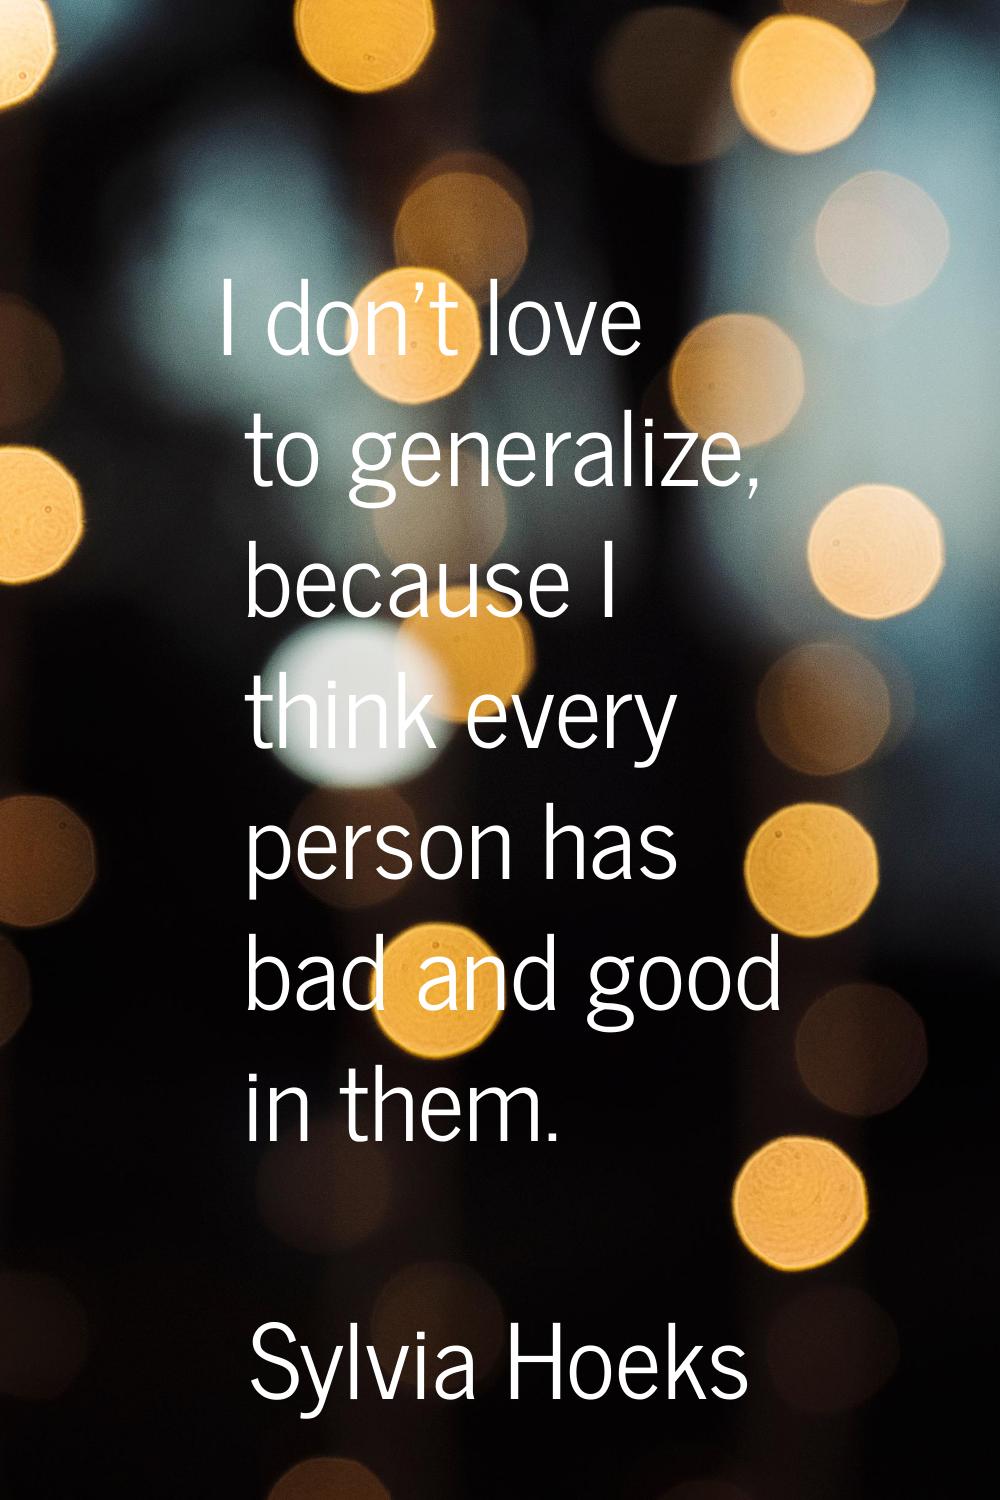 I don't love to generalize, because I think every person has bad and good in them.